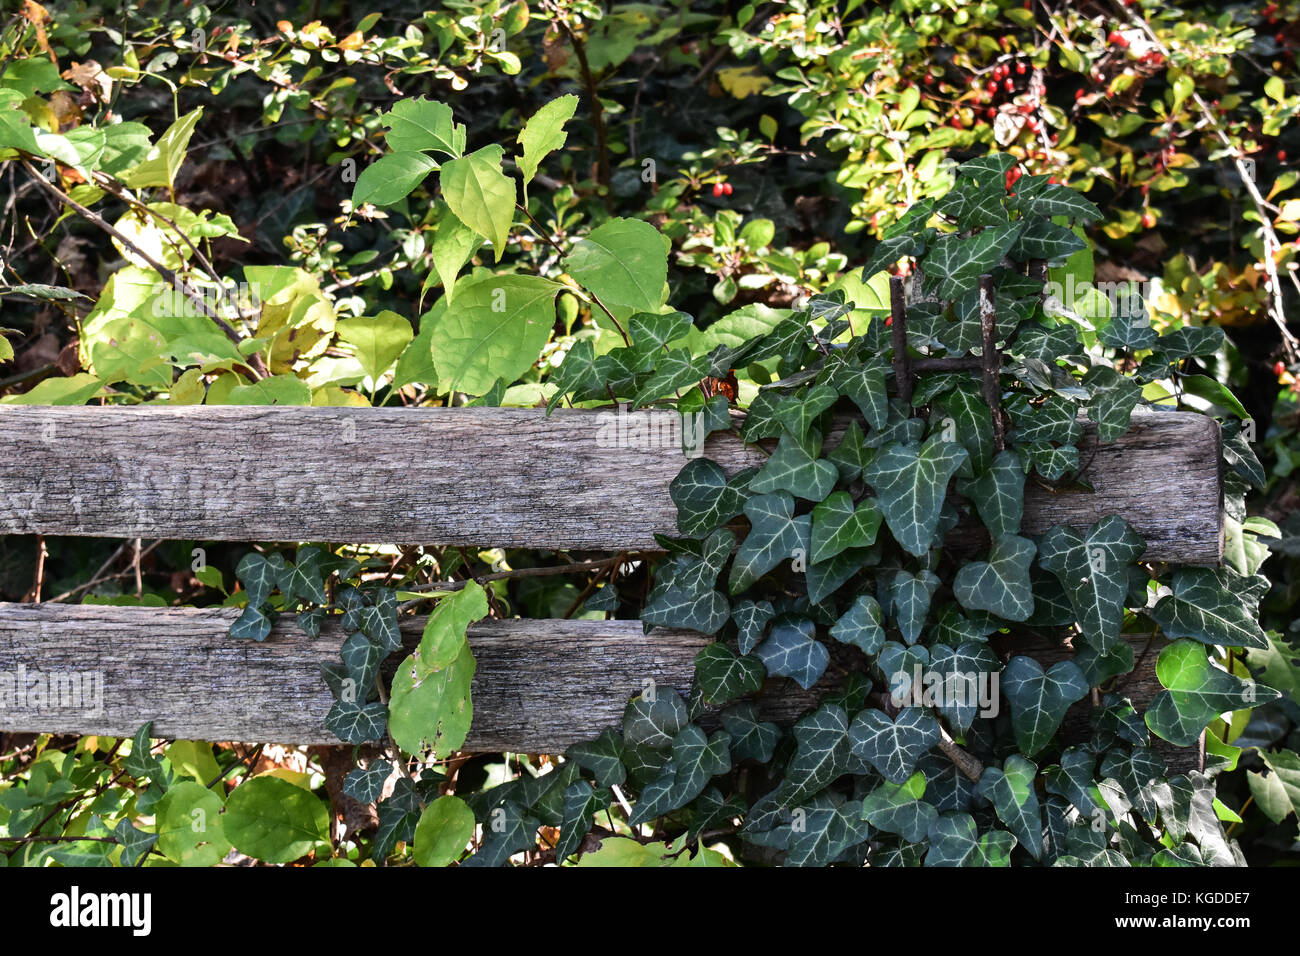 Ivy, red berries and other natural growth overtaking old wooden bench in overgrown vegetated area Stock Photo